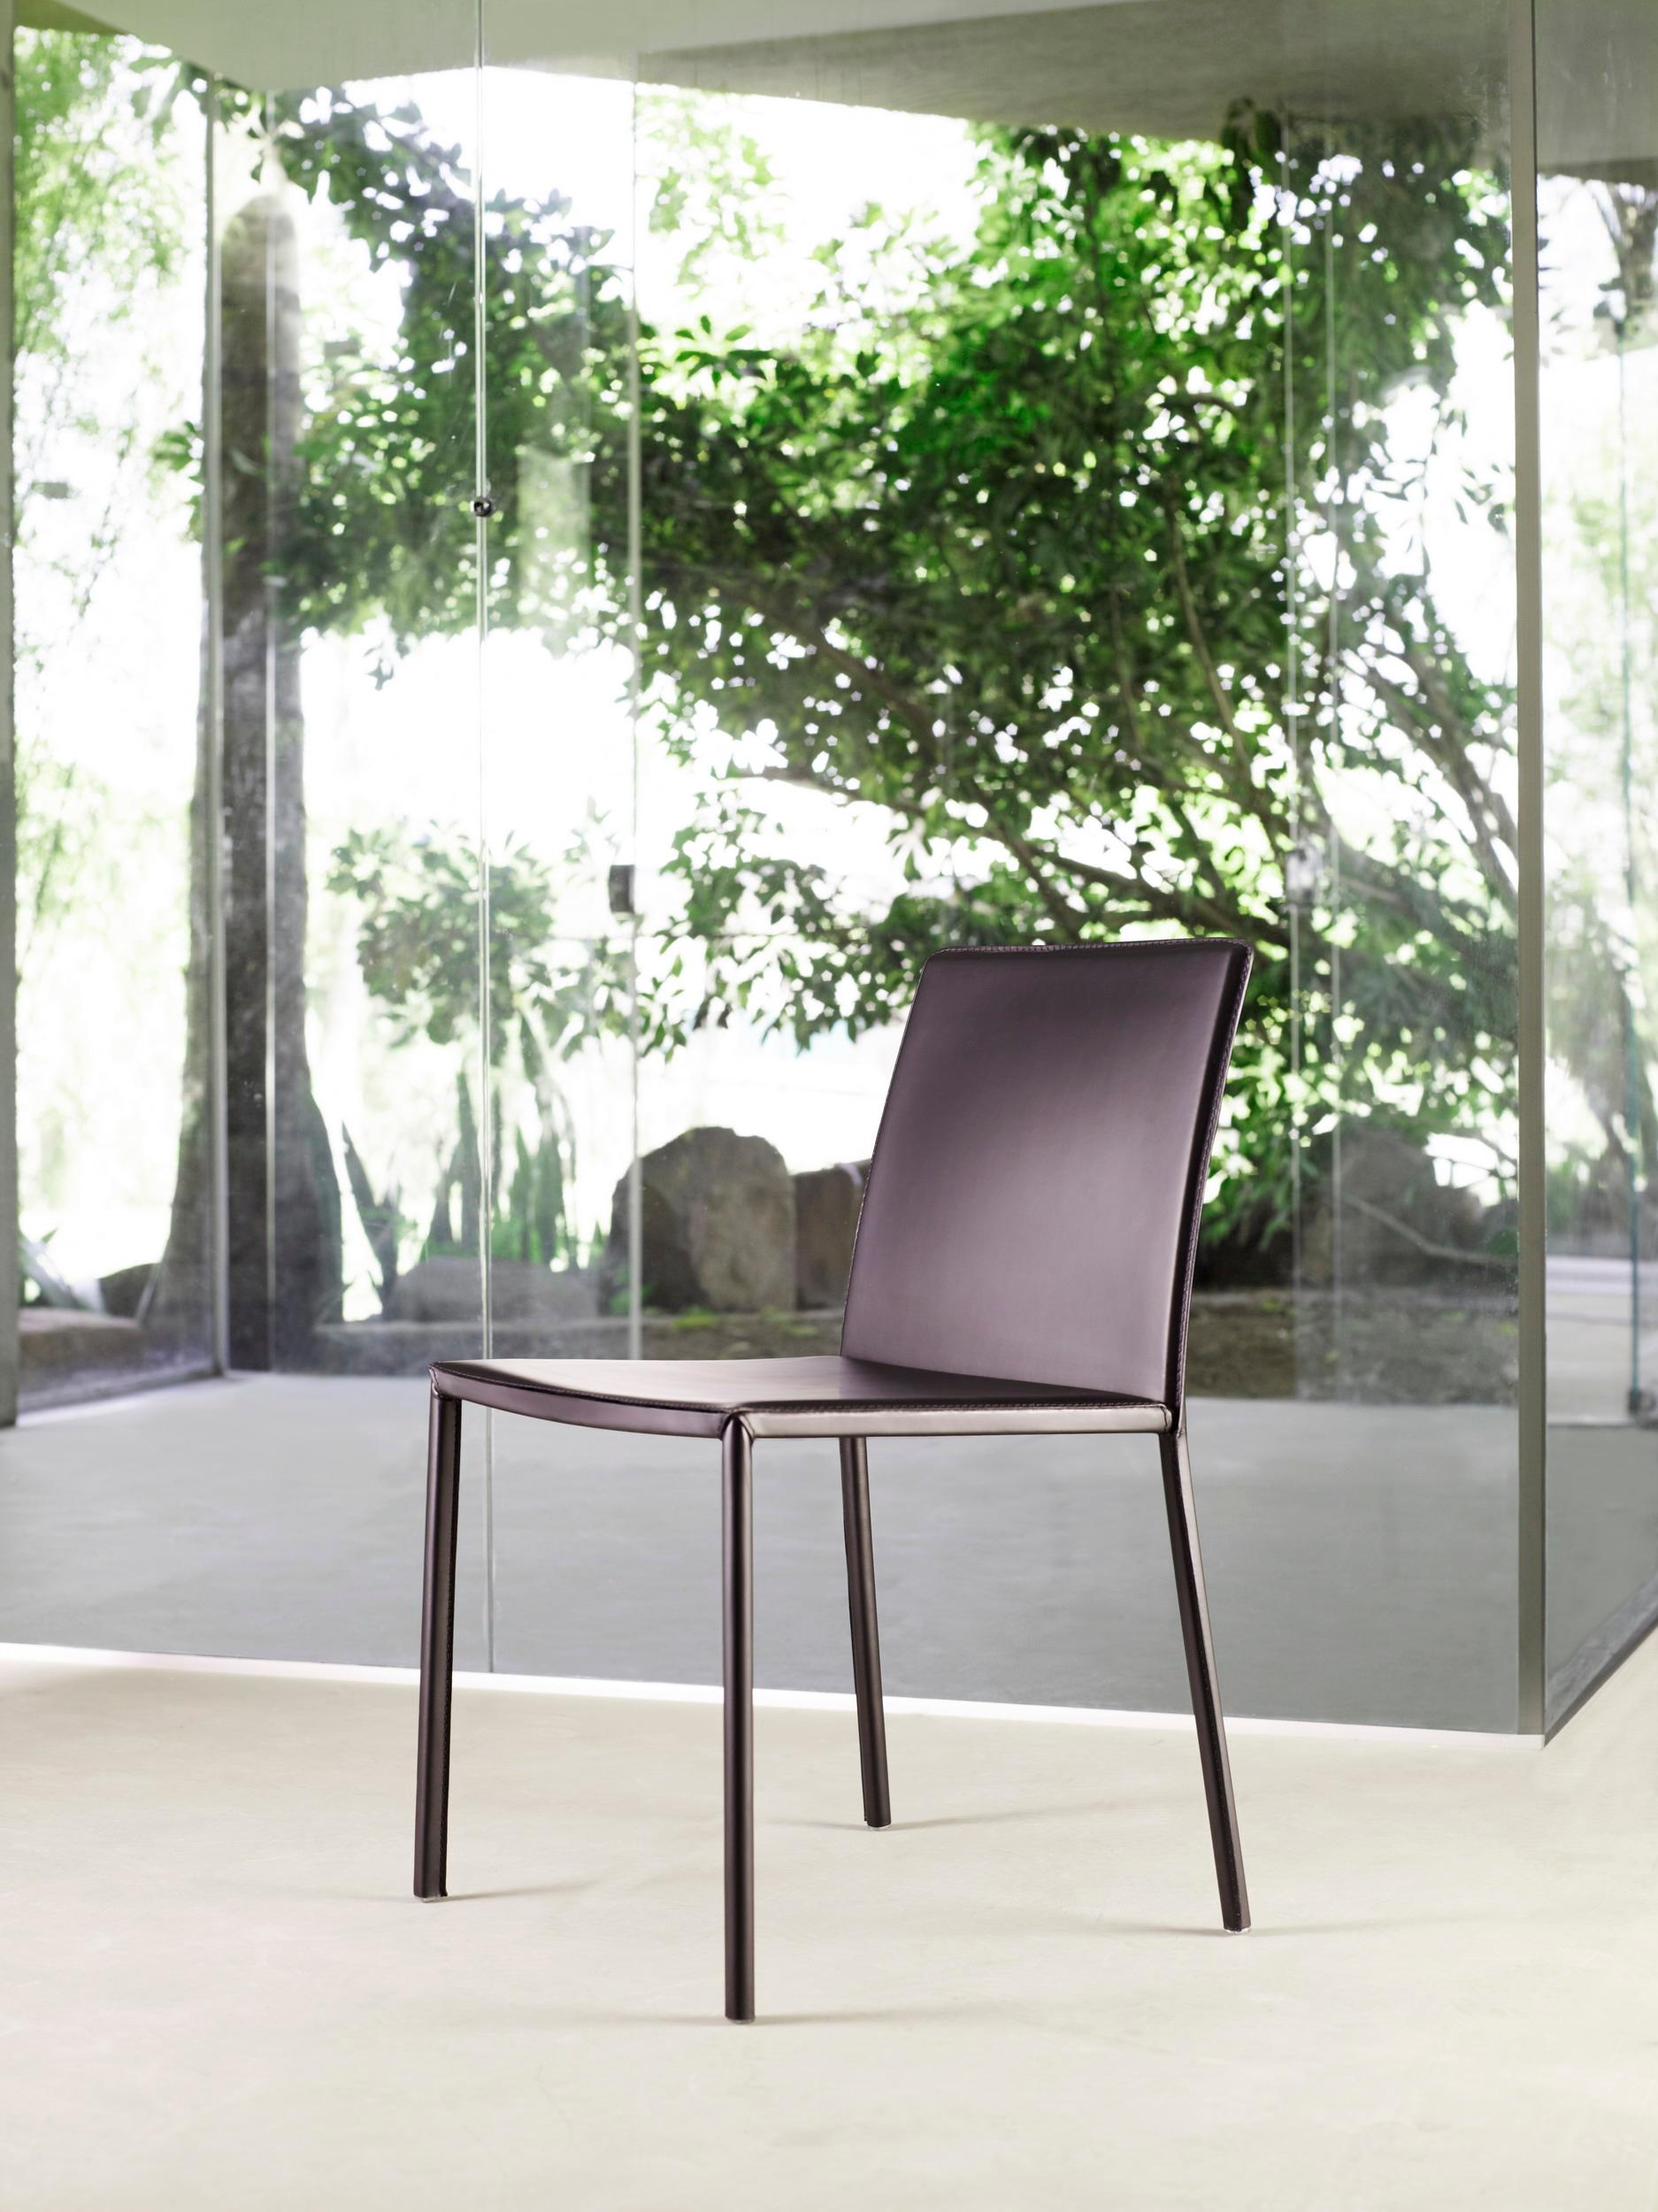 Smart Chair by Doimo Brasil
Dimensions: W 52 x D 57 x H 81 cm 
Materials: Metal, covered with reconstituted leaher.

With the intention of providing good taste and personality, Doimo deciphers trends and follows the evolution of man and his space.